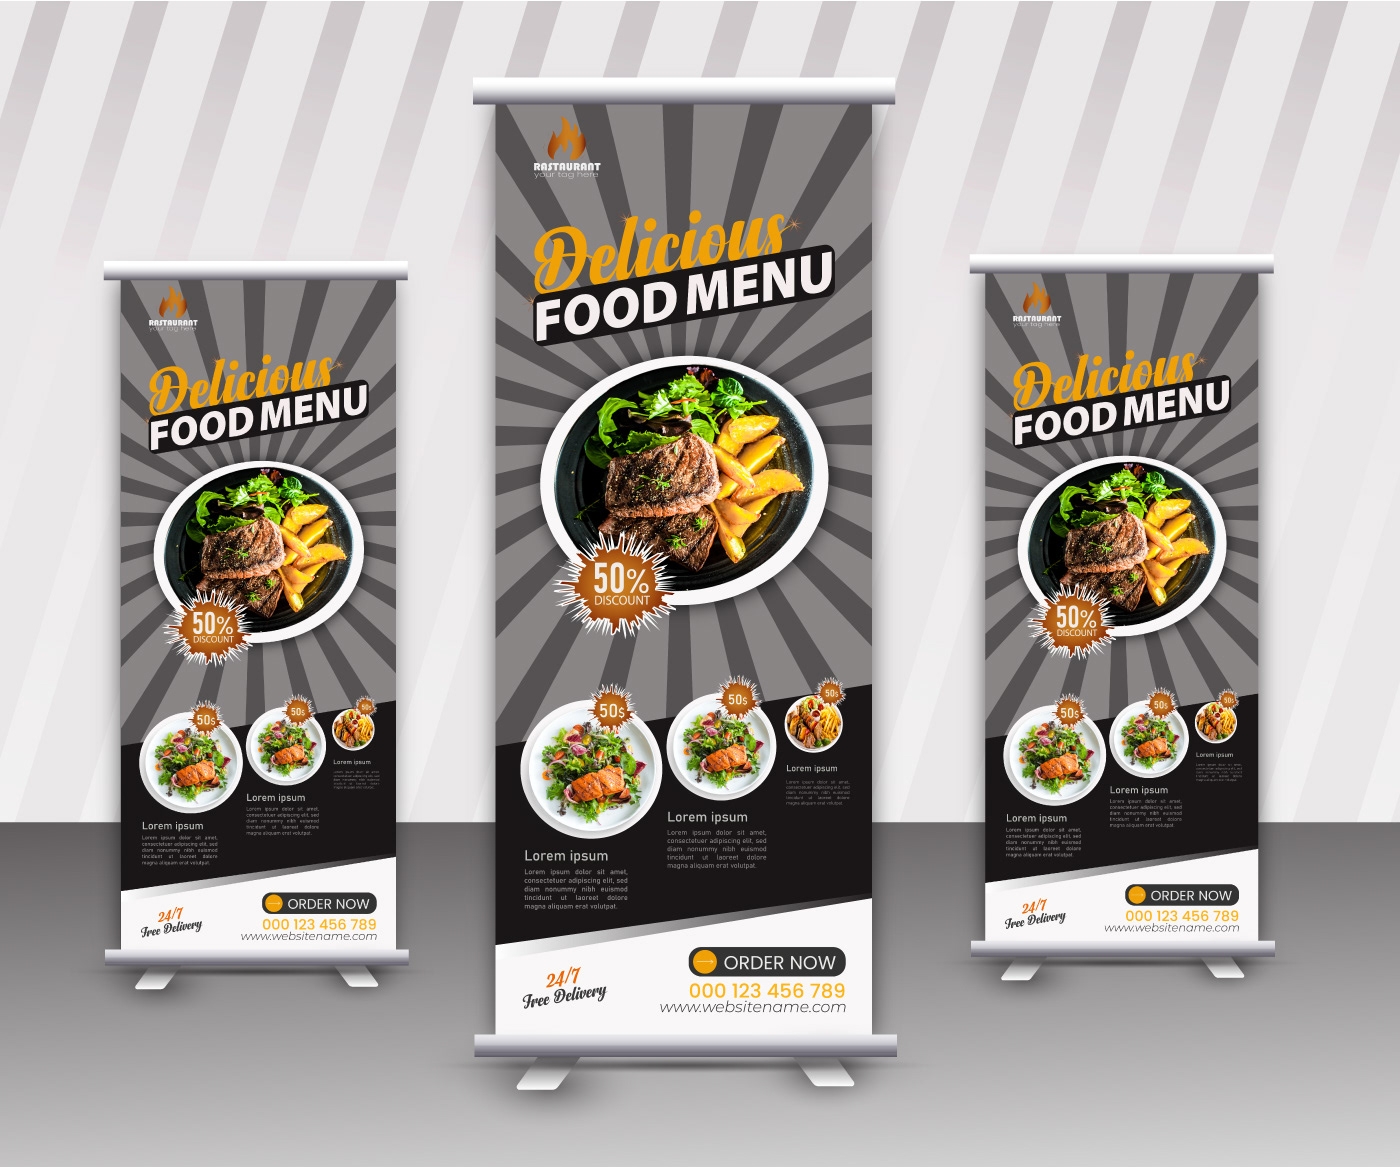 Roll-Up rollup rollup banner design food roll up banner restaurant Fast food food menu food menu design restaurant flyer restaurant template